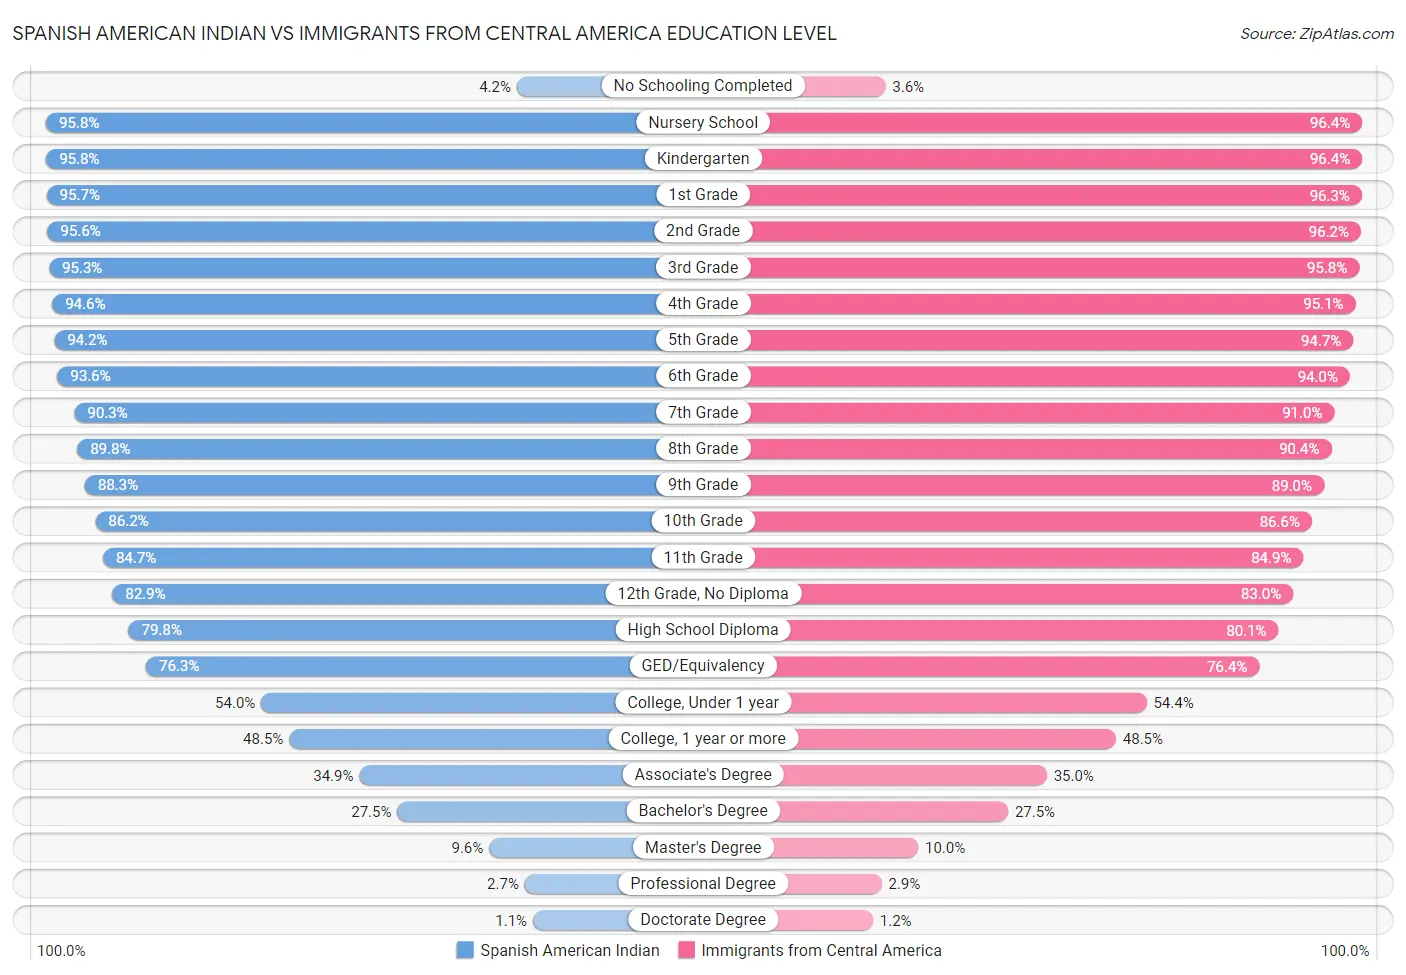 Spanish American Indian vs Immigrants from Central America Education Level